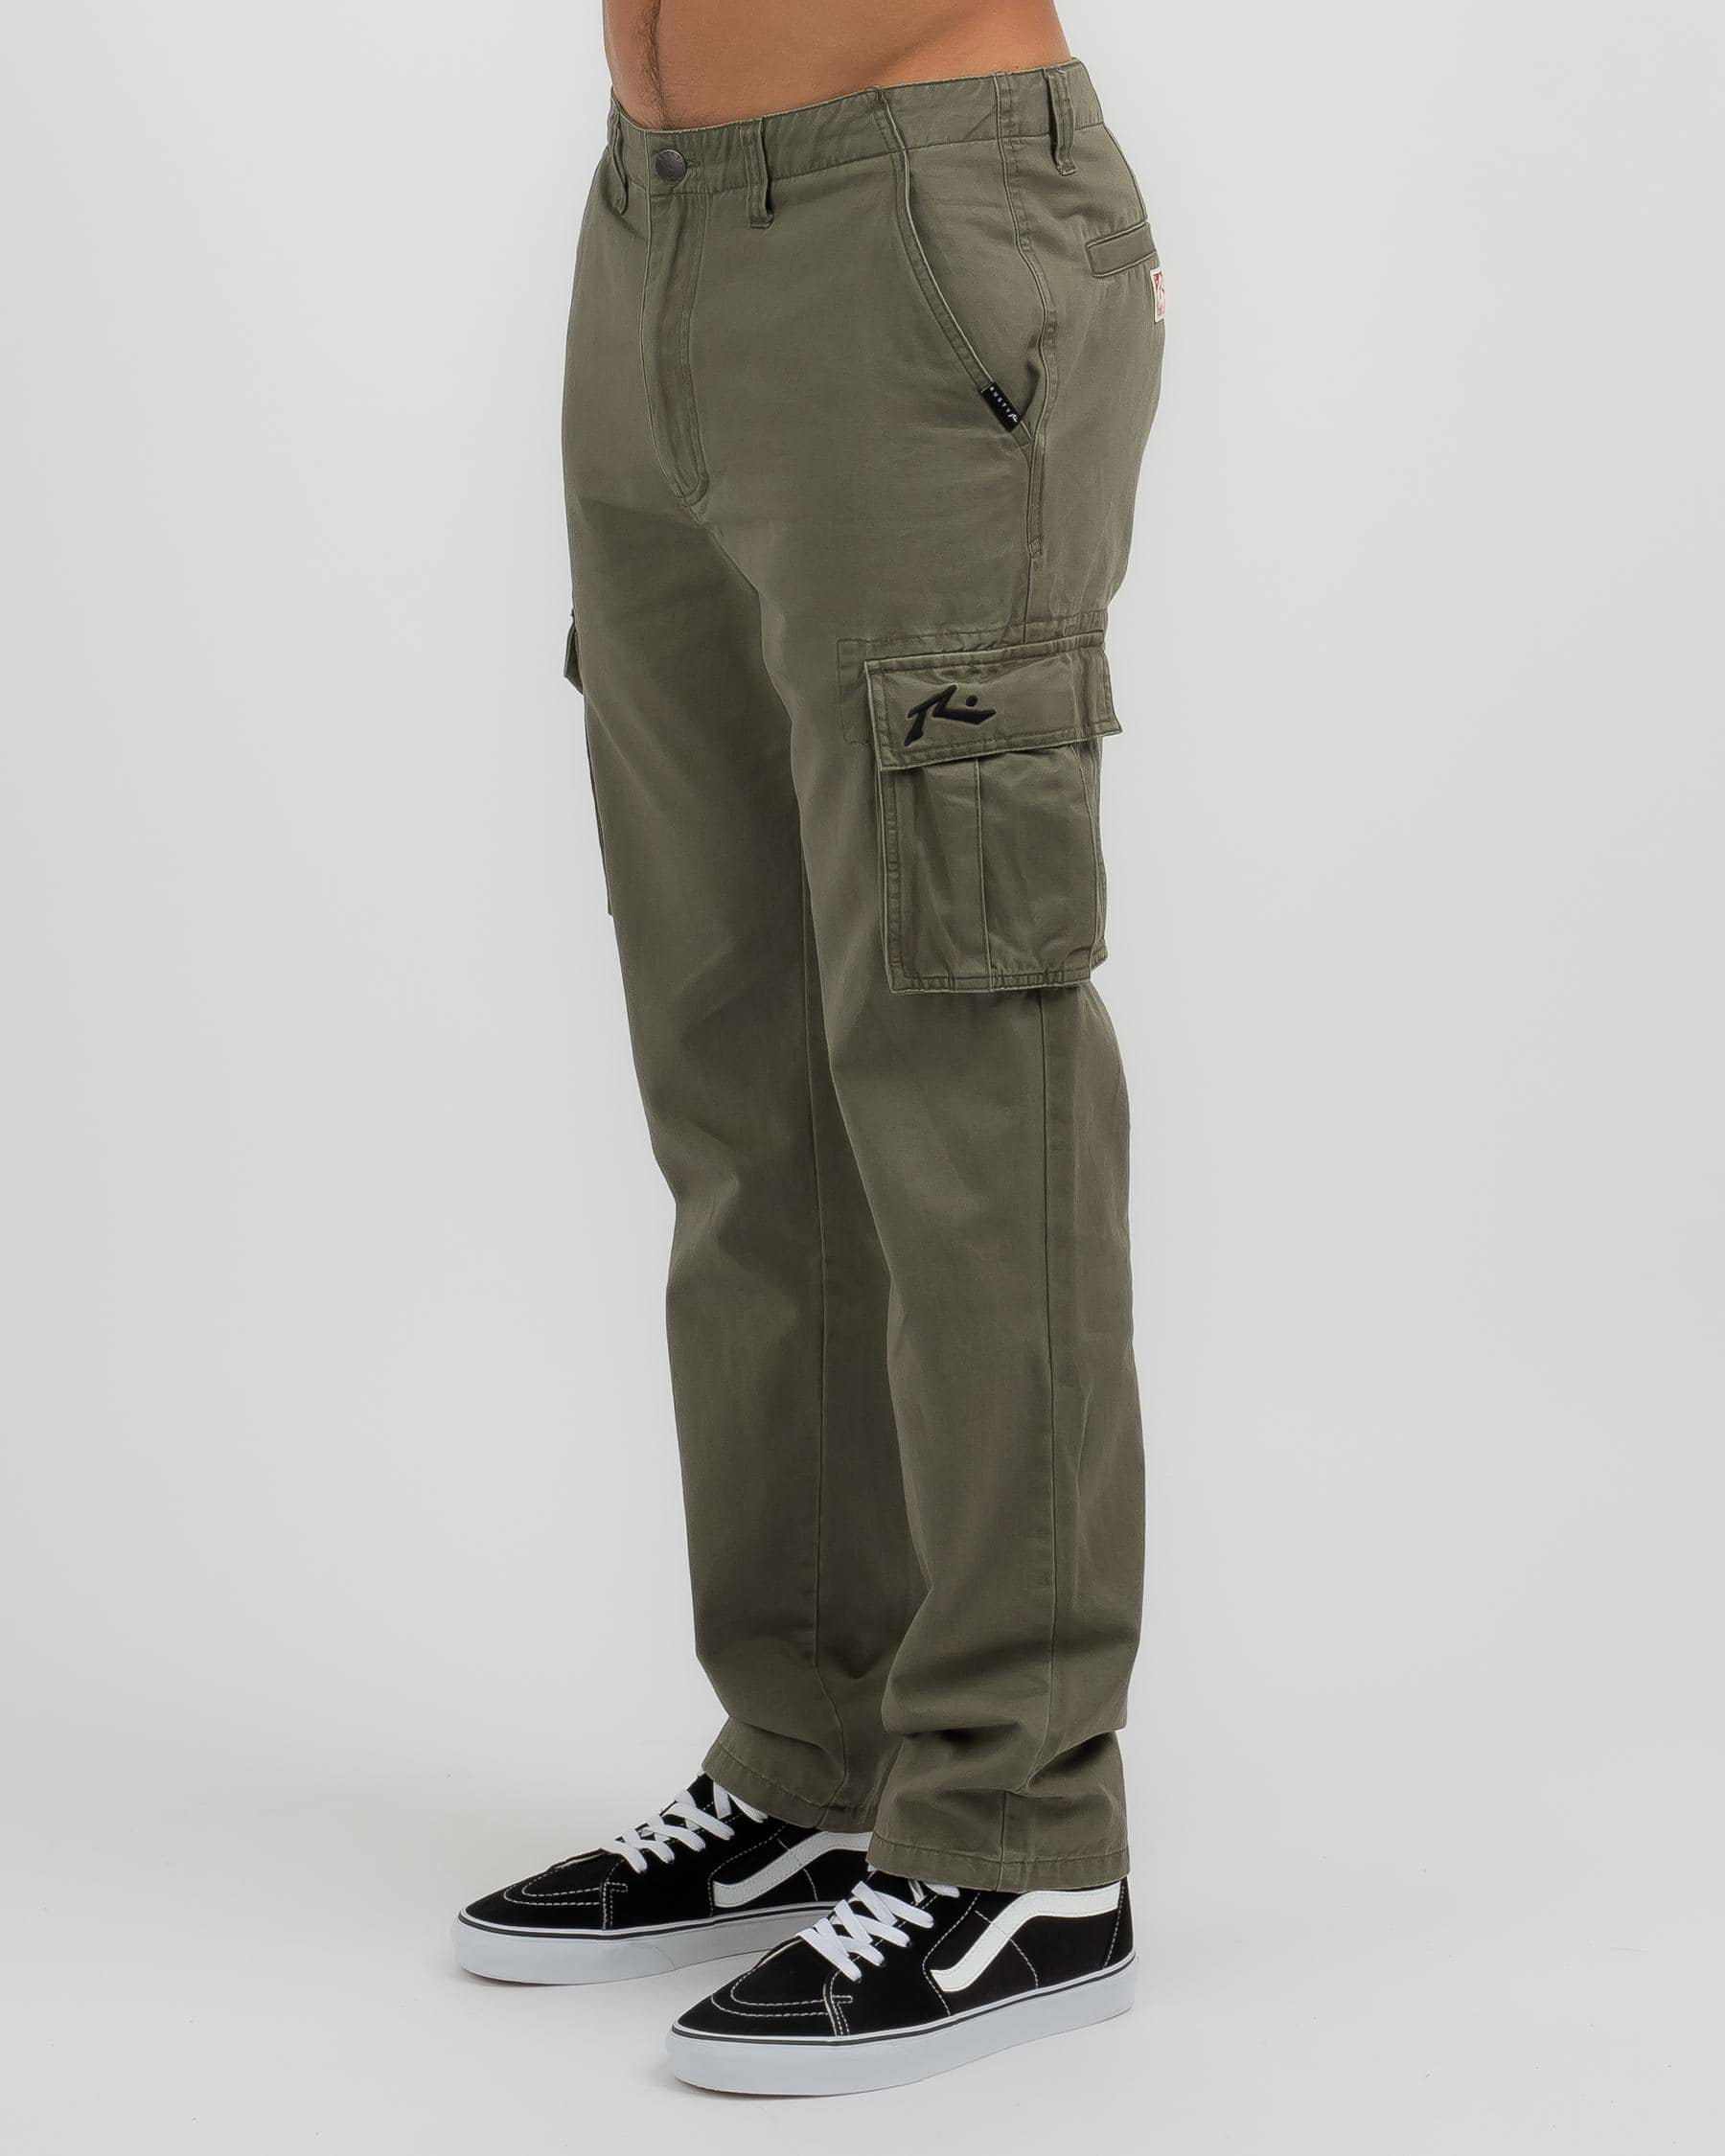 Shop Rusty Manila Cargo Pants In Army Green - Fast Shipping & Easy ...